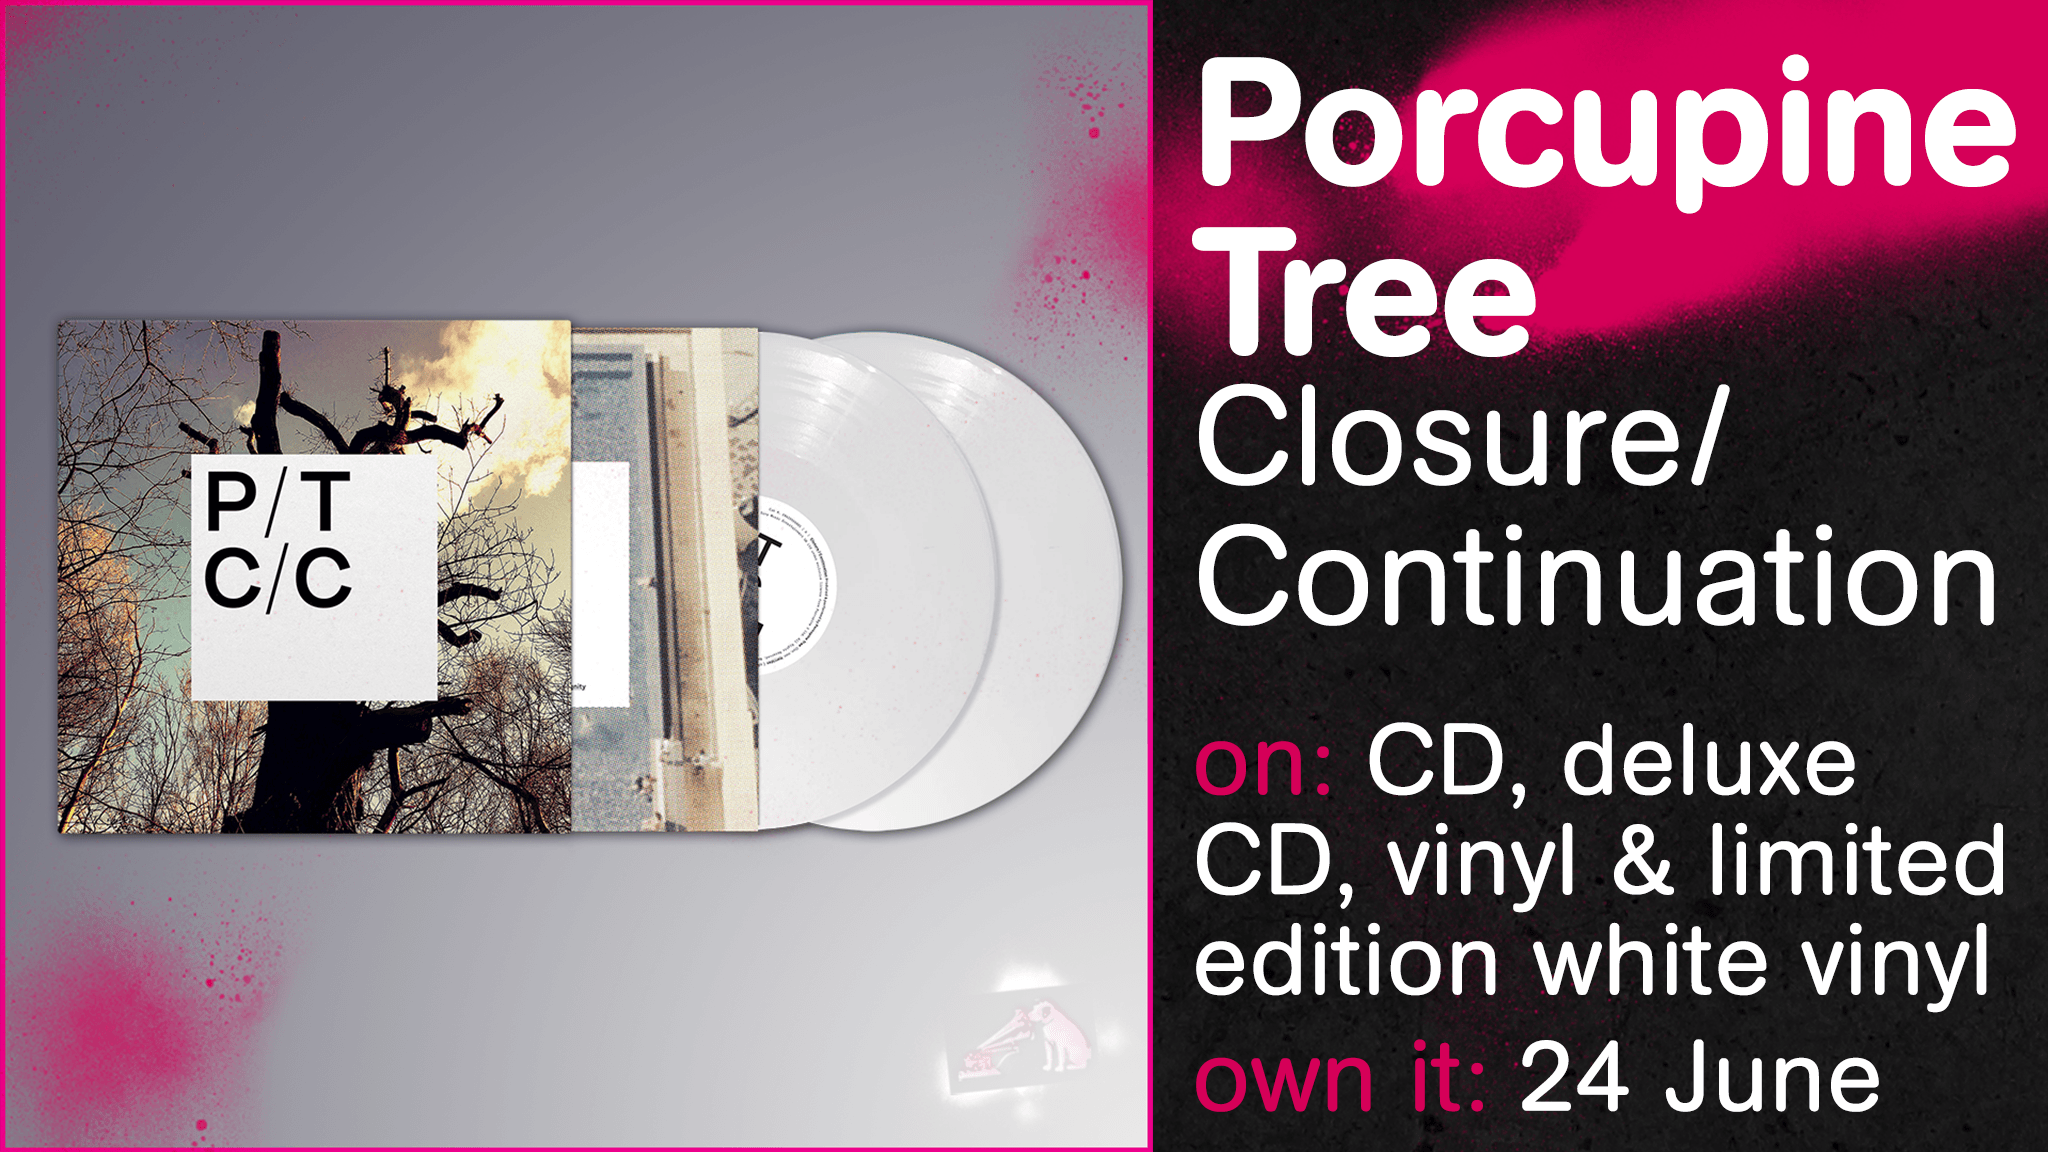 hmv on Twitter: &amp;quot;New album from Porcupine Tree up for pre-order! Reserve your copy of Closure/Continuation right here: https://t.co/y1MZyPXCxp https://t.co/cvk7vleNTr&amp;quot; / Twitter